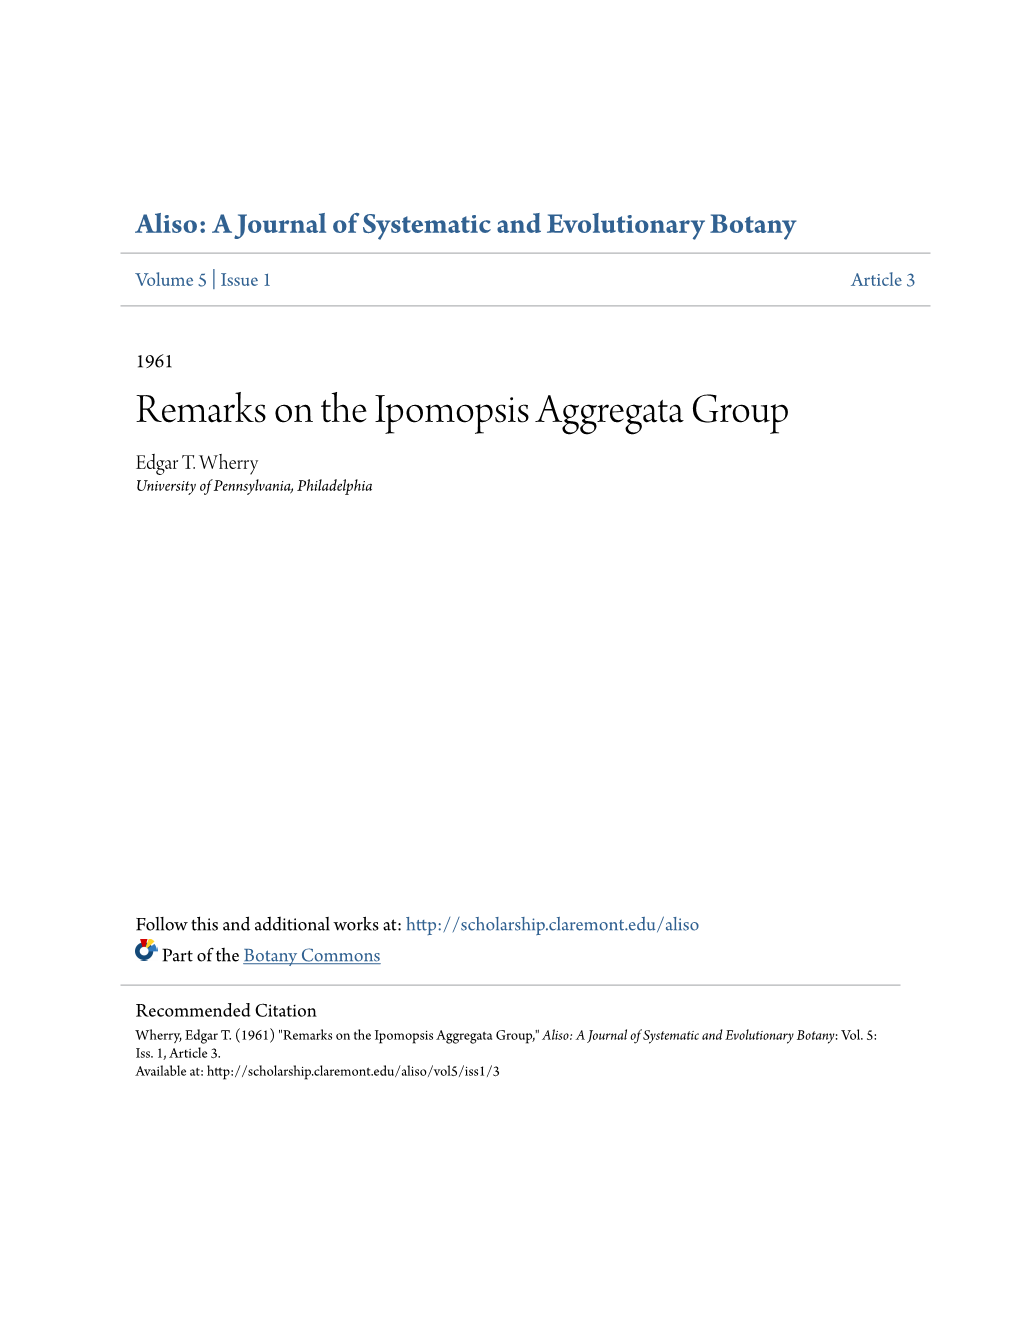 Remarks on the Ipomopsis Aggregata Group Edgar T